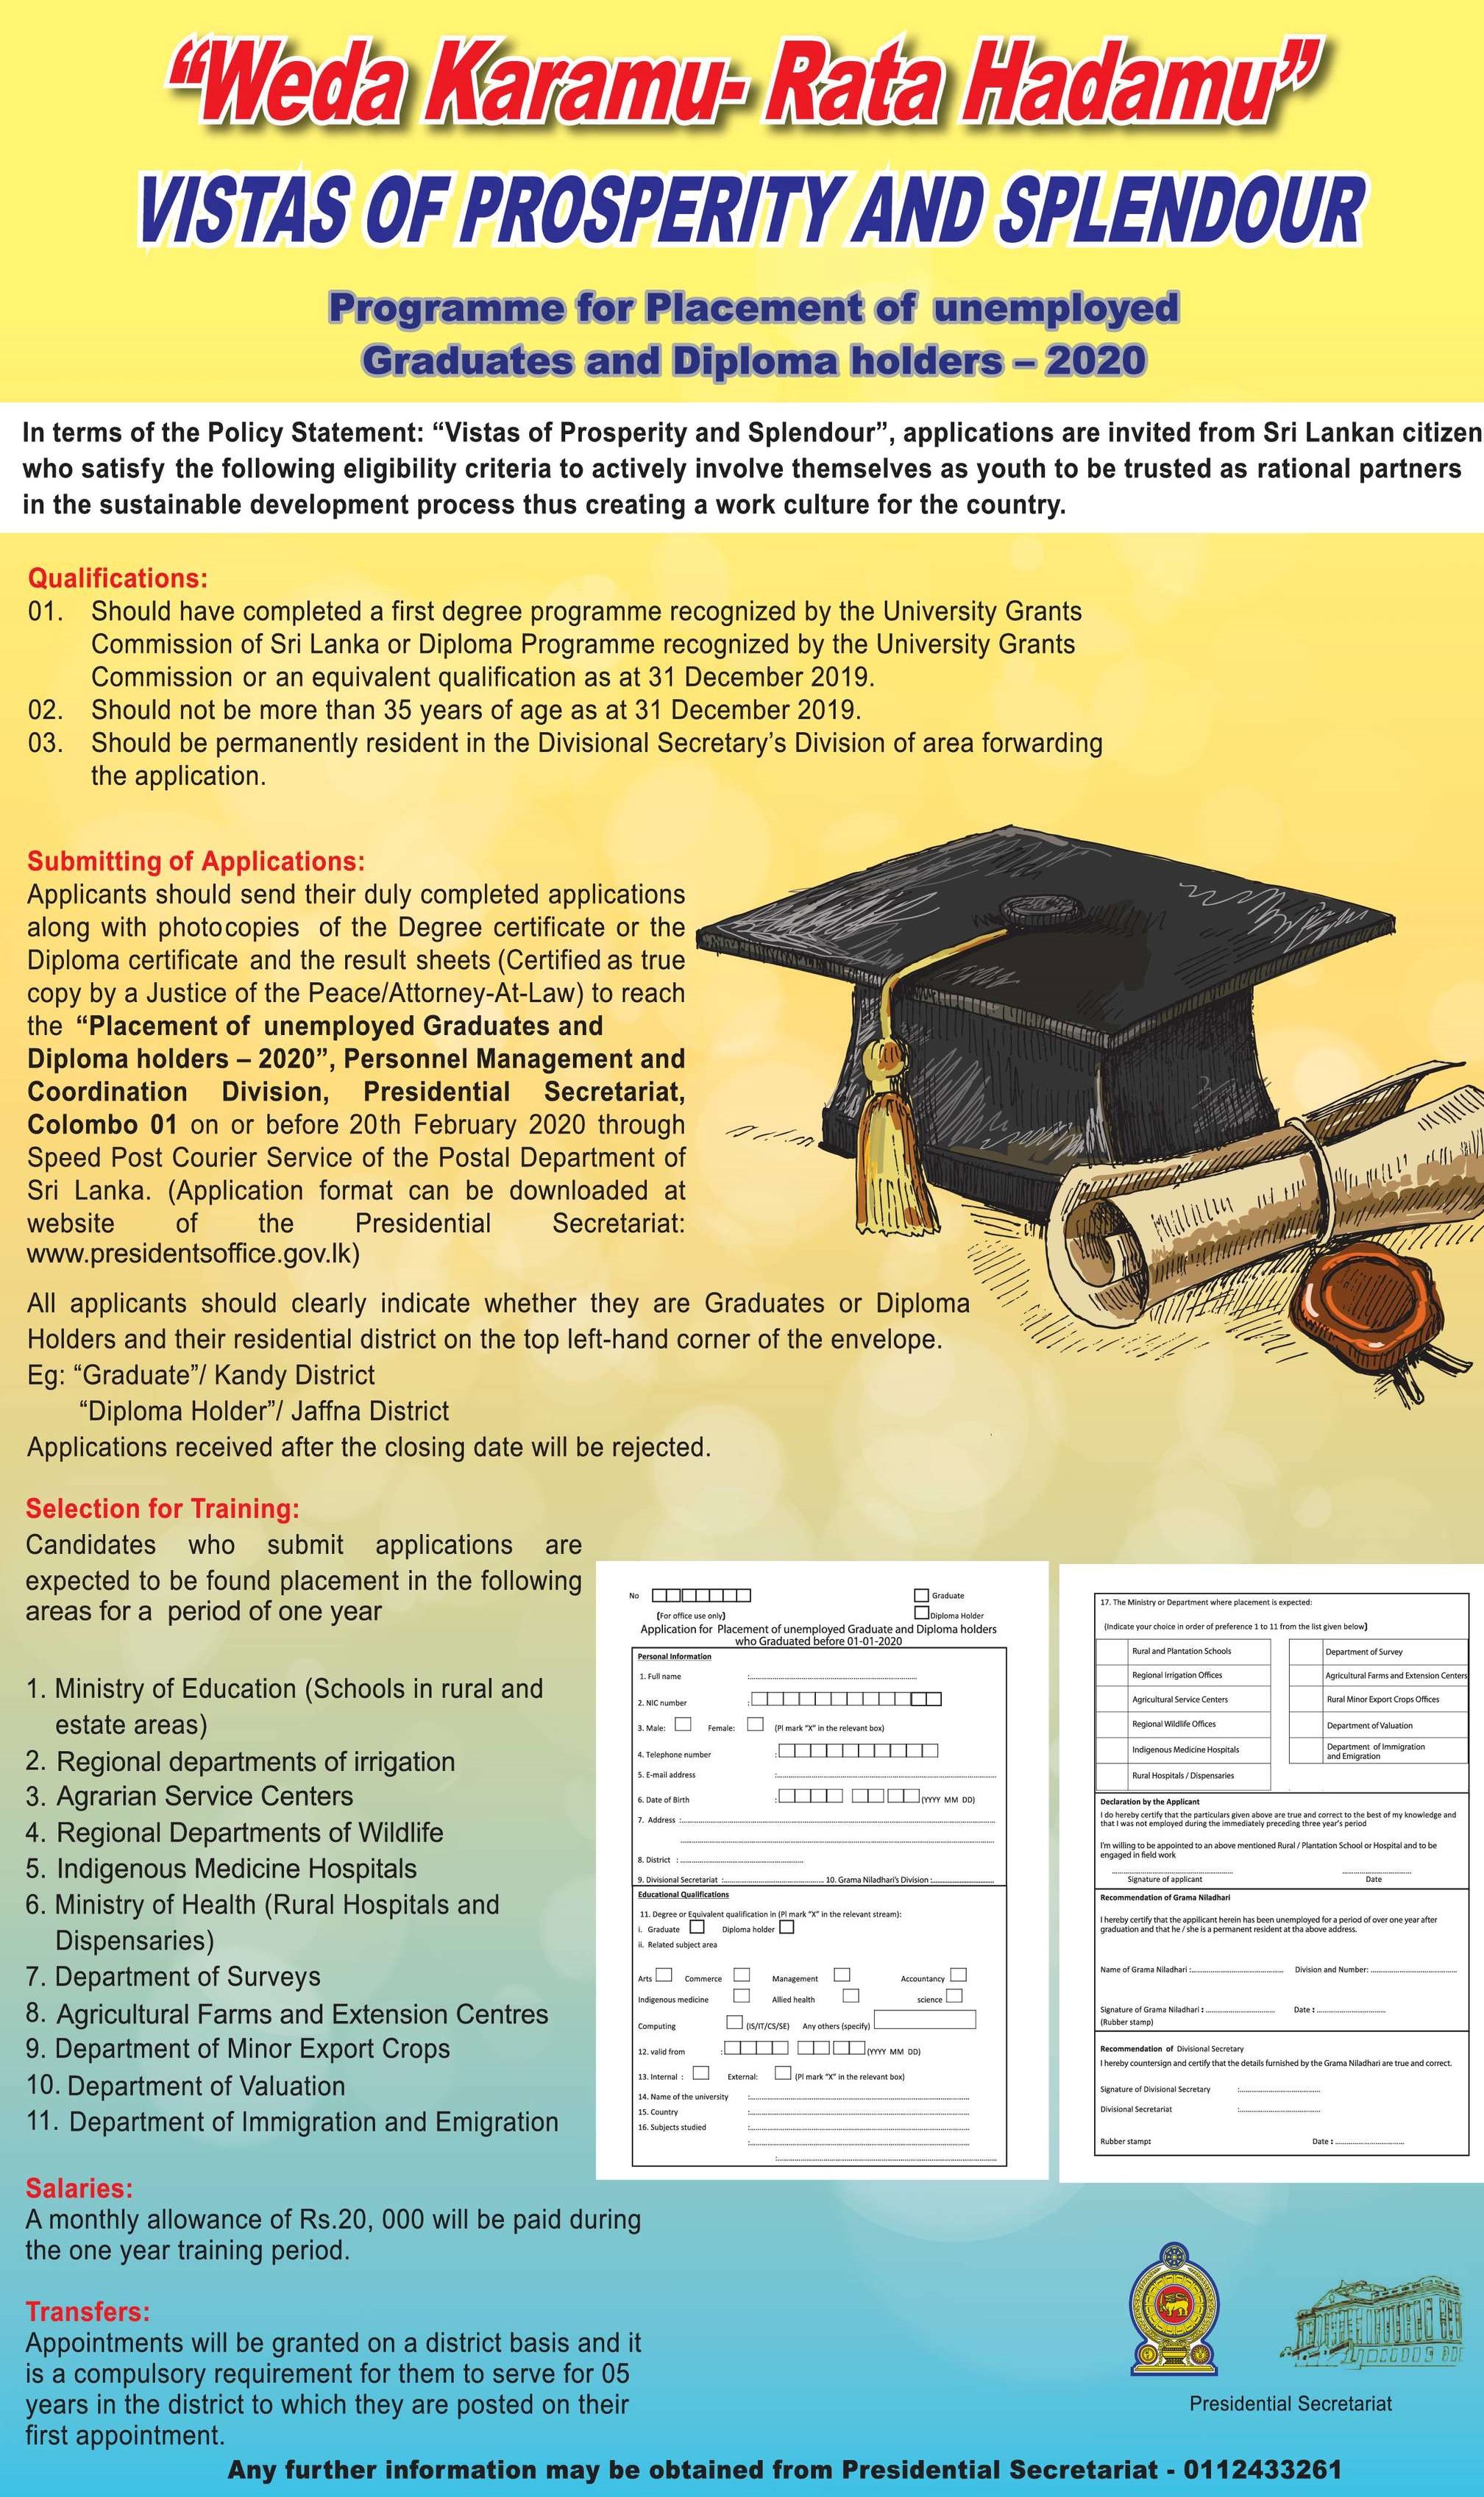 Programme for Placement of Unemployed Graduates & Diploma Holders 2020